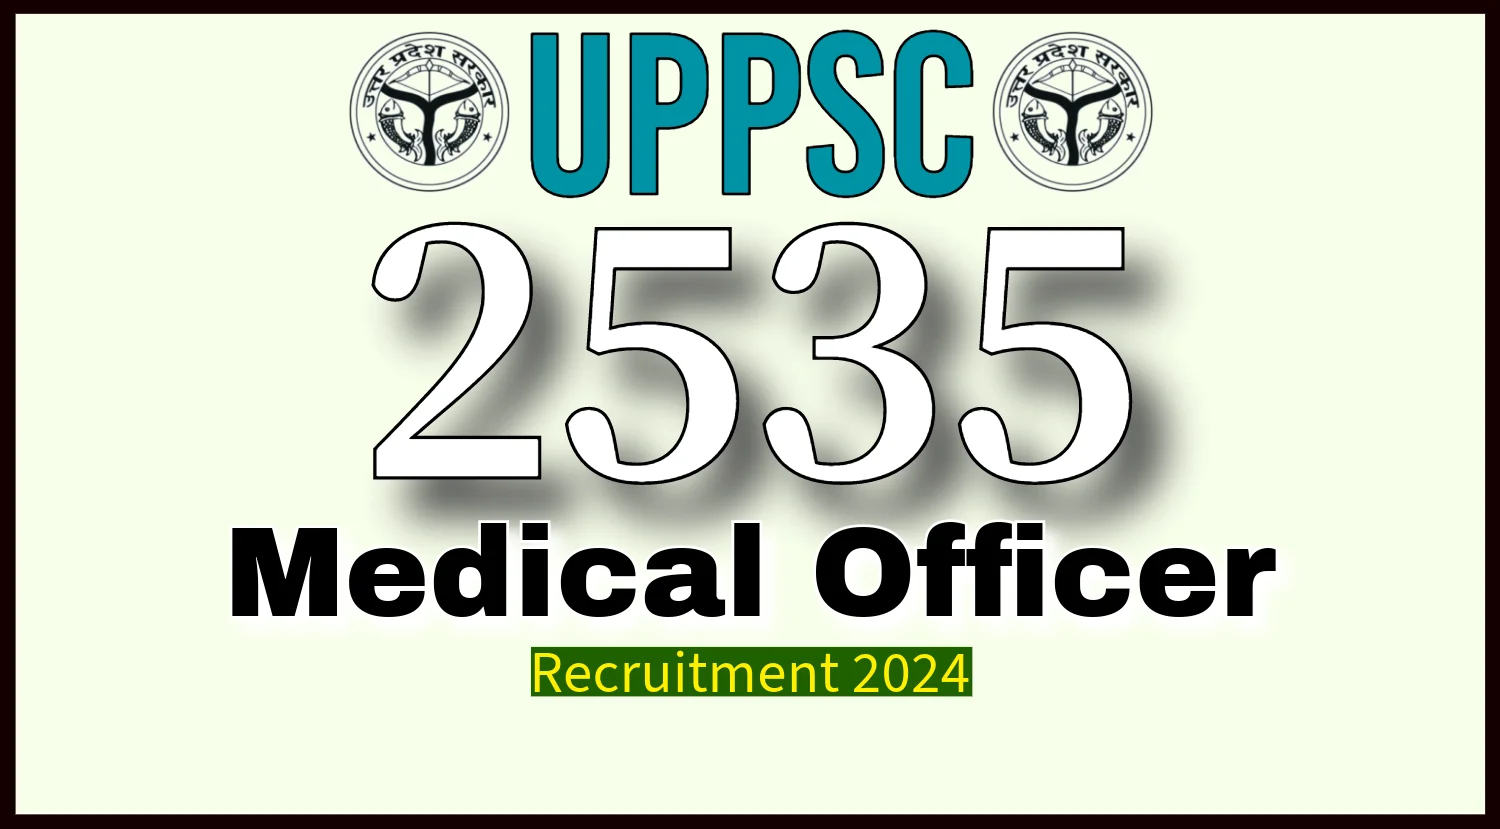 UPPSC Medical Officer Recruitment 2024 Notification For 2535 Vacancies Out